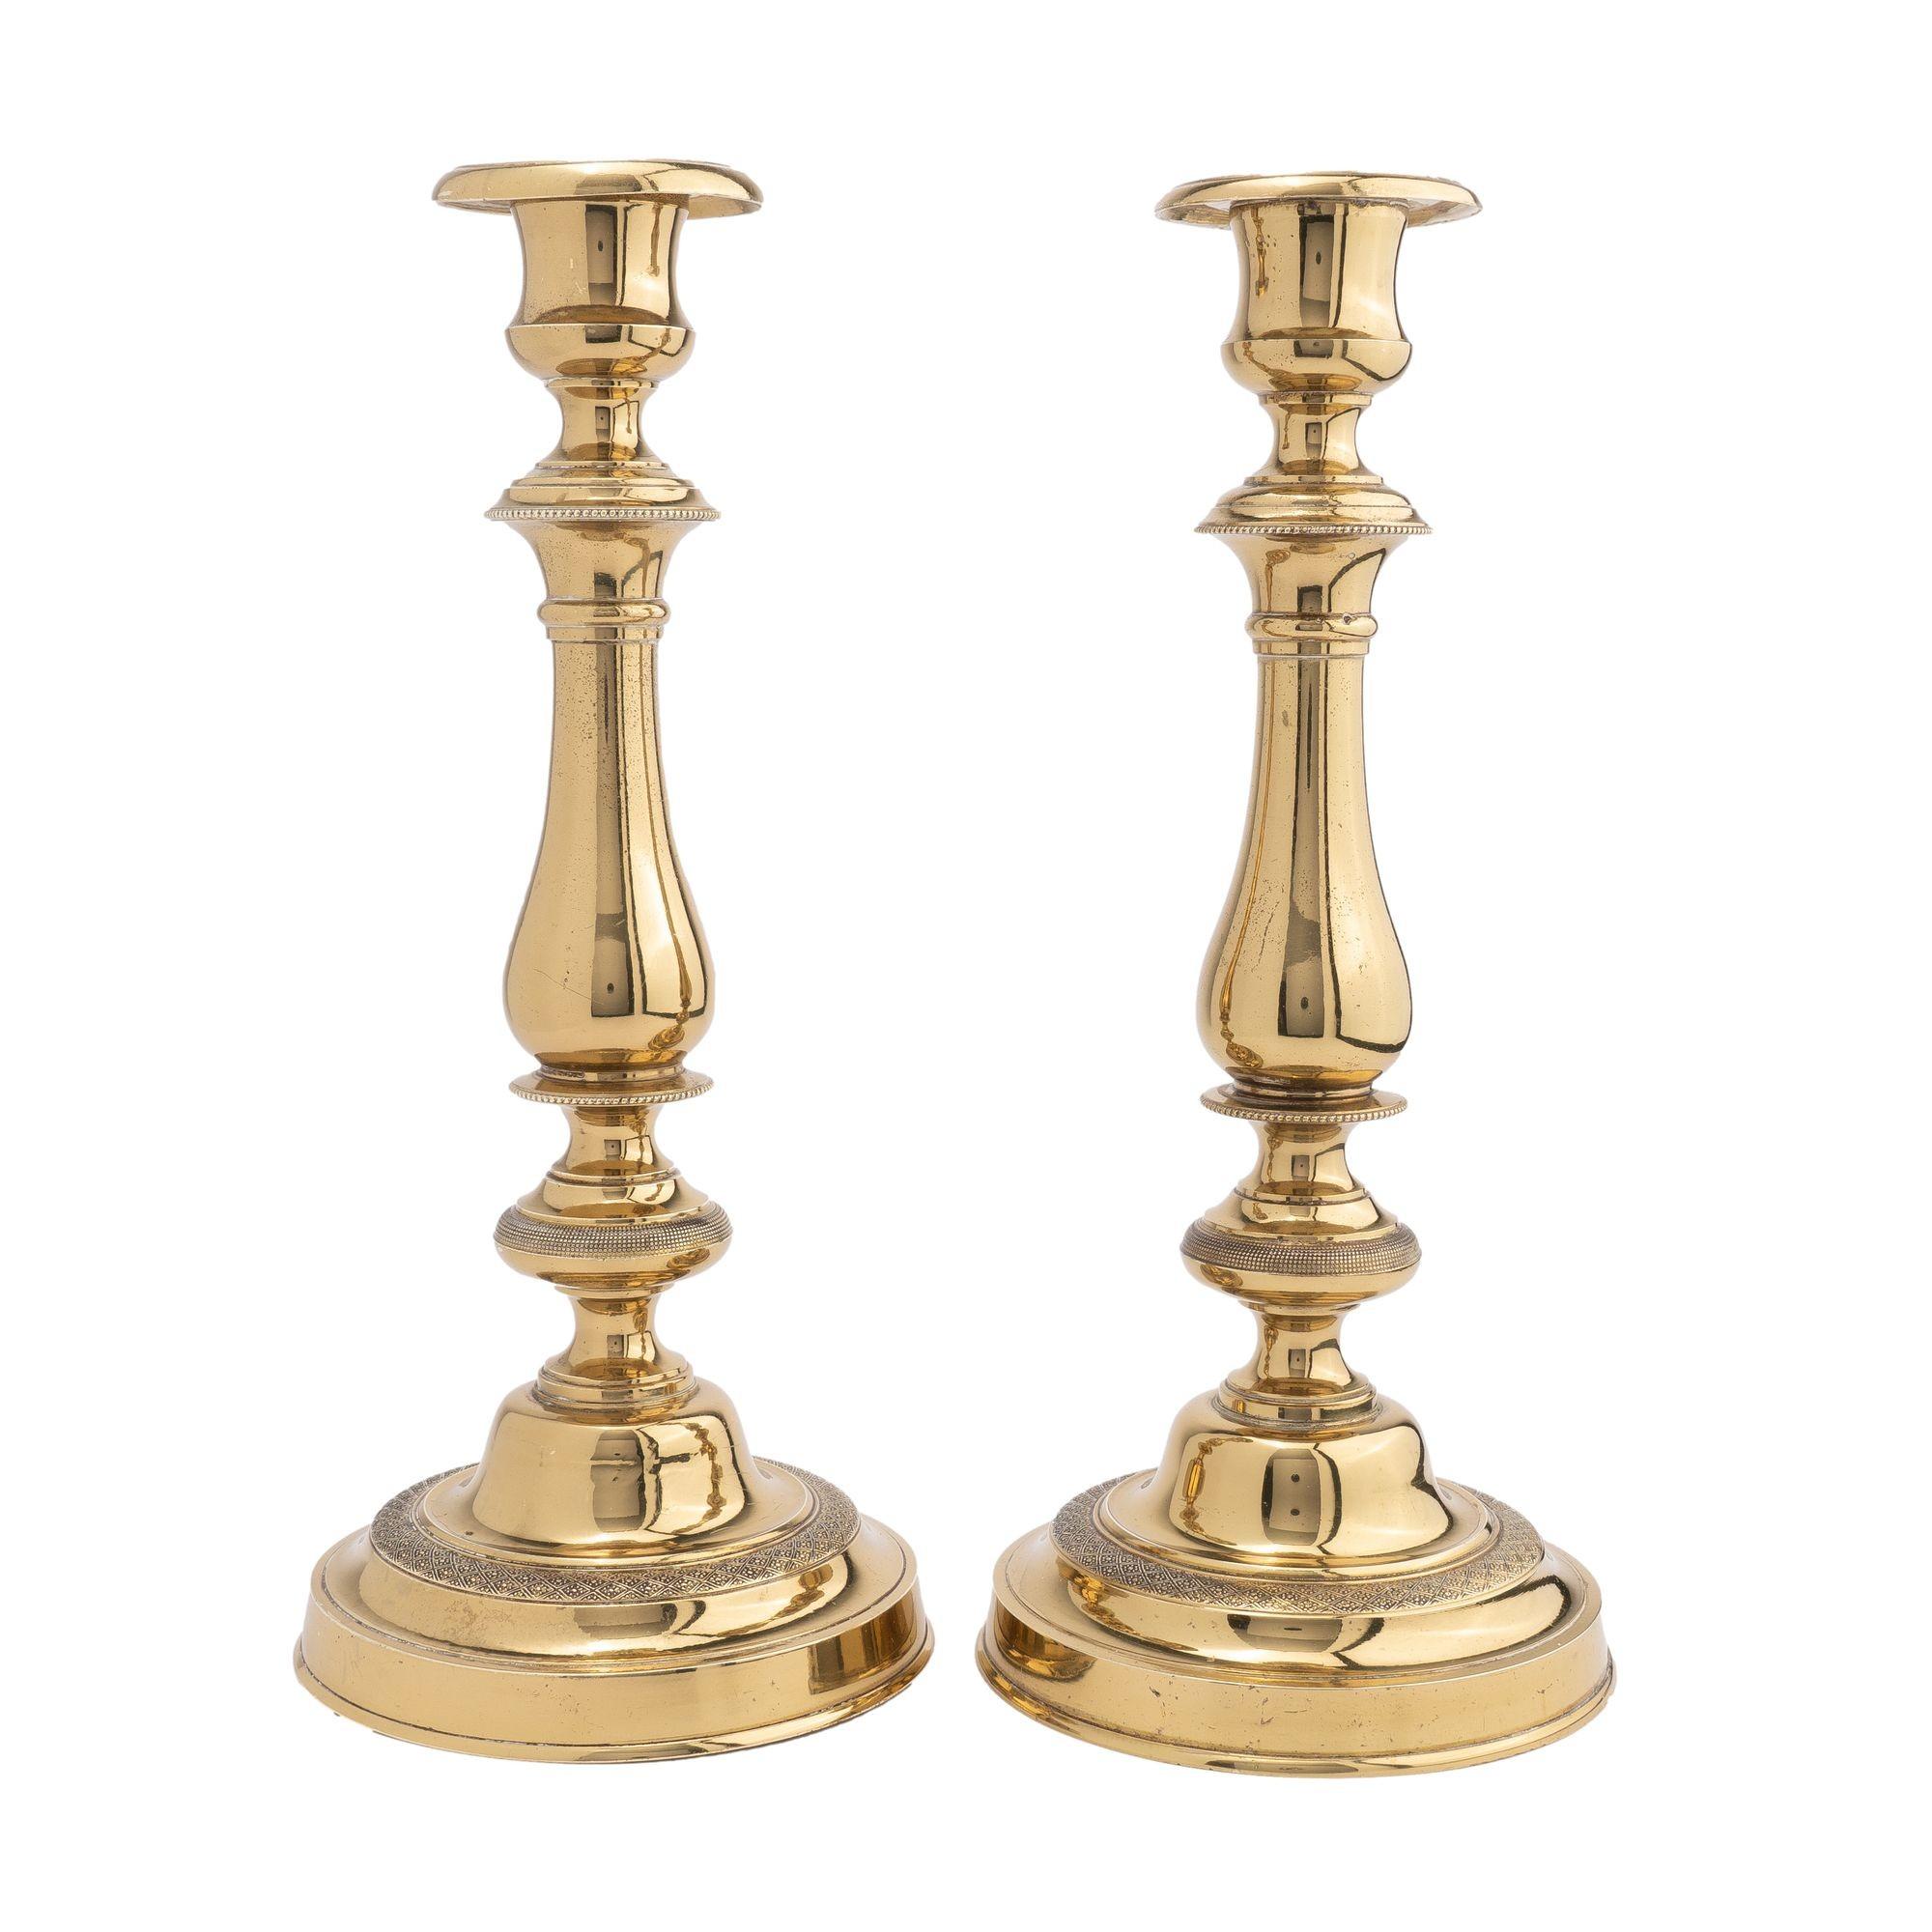 Pair of cast brass, engine turned, French Empire period candlesticks. The pear shaped candle shaft are framed by beaded reel turnings and an engine turned knob above a raised engine turned circular base. The shaft supports an urn form candle cup